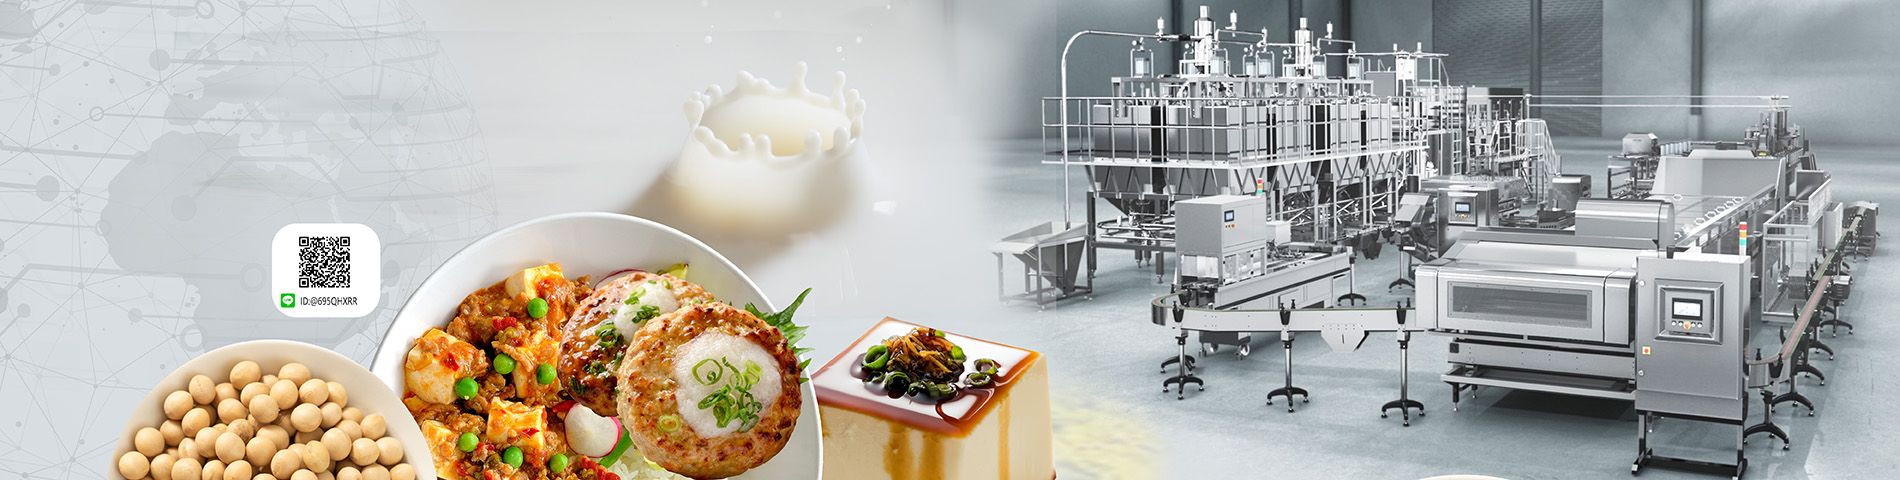 Leading of Soybean Food  Production Solution Provider